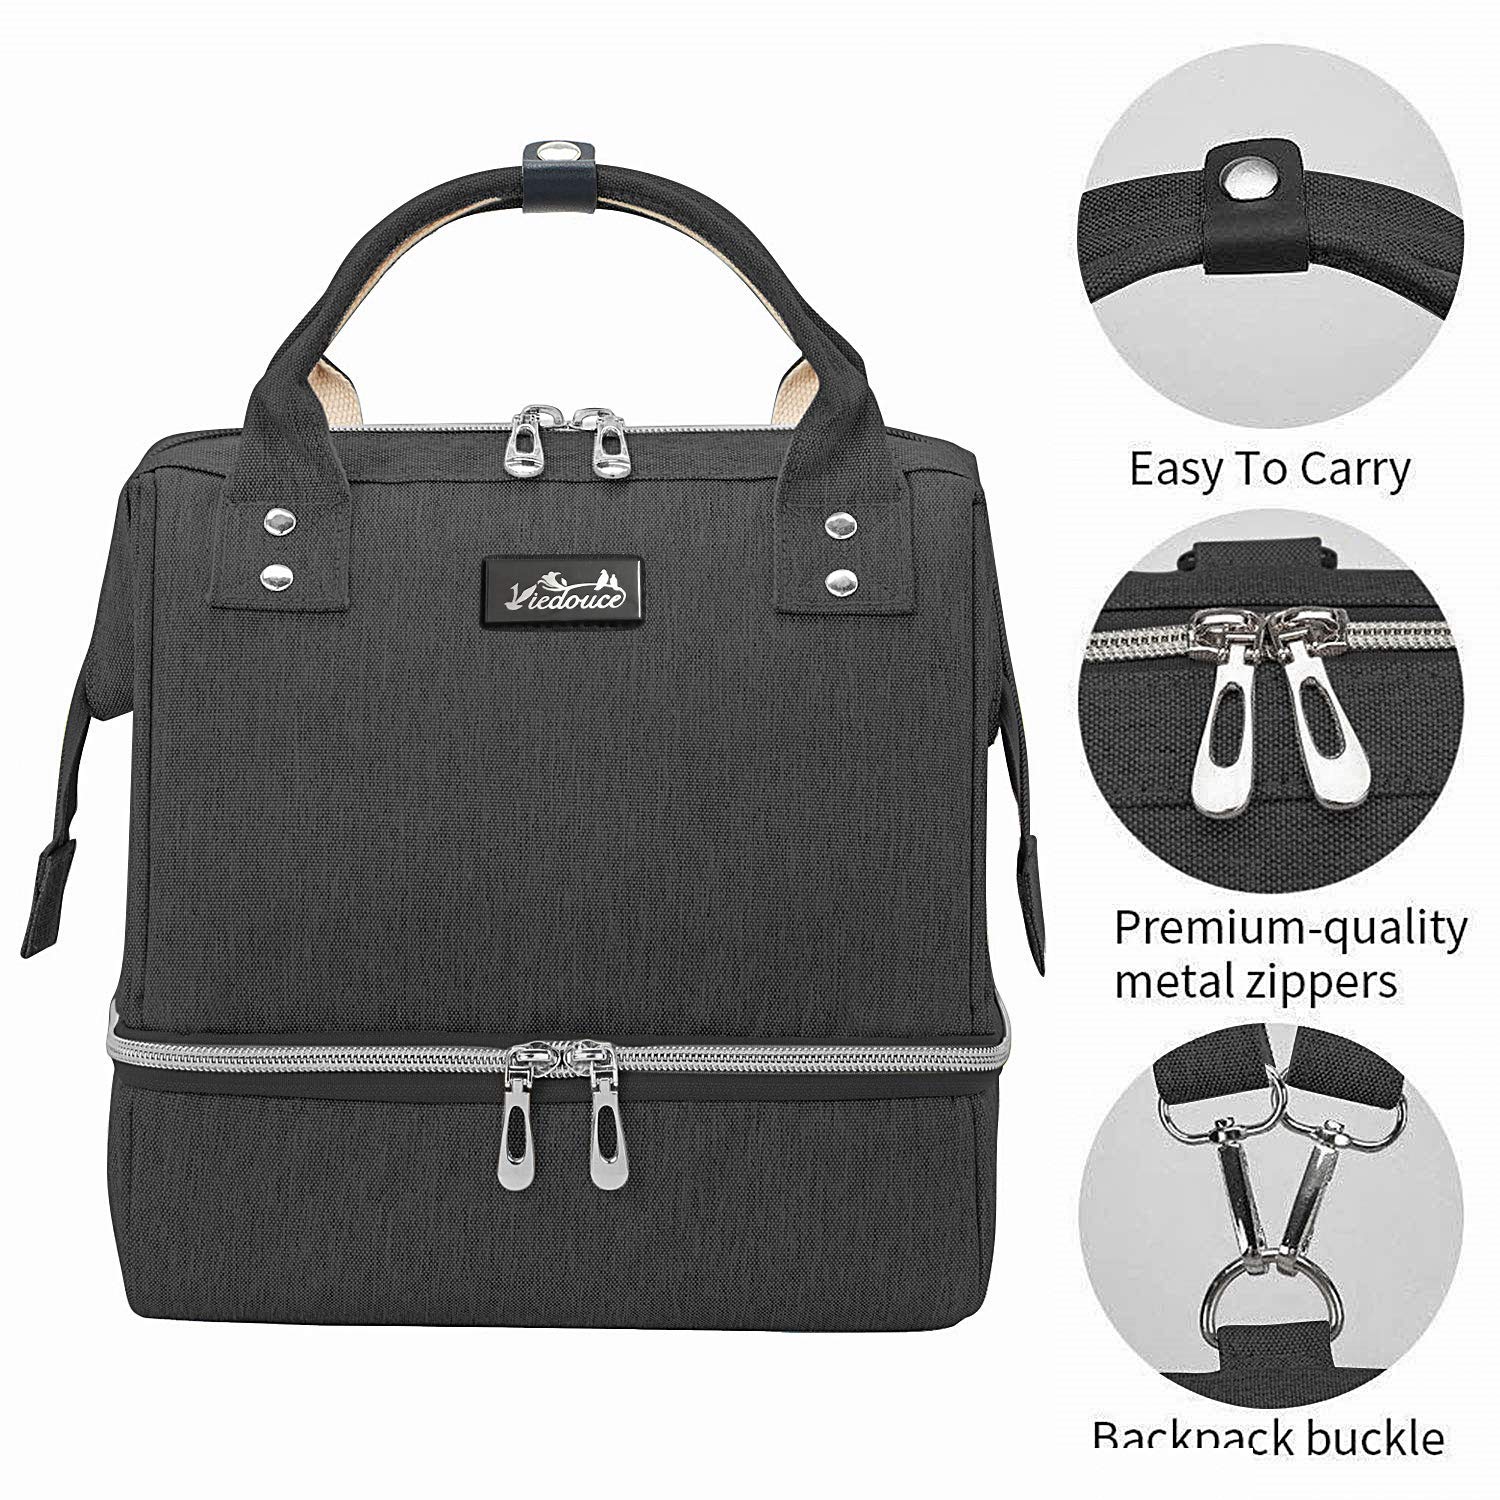 Viedouce Mini Insulated Lunch Bag Backpack, Picnic Handbag for Travel,Waterproof Oxford Insulated Bag with USB Charging Port and 2 Adjustable Strap,Camping Bag Elegant Compact(Small Size)